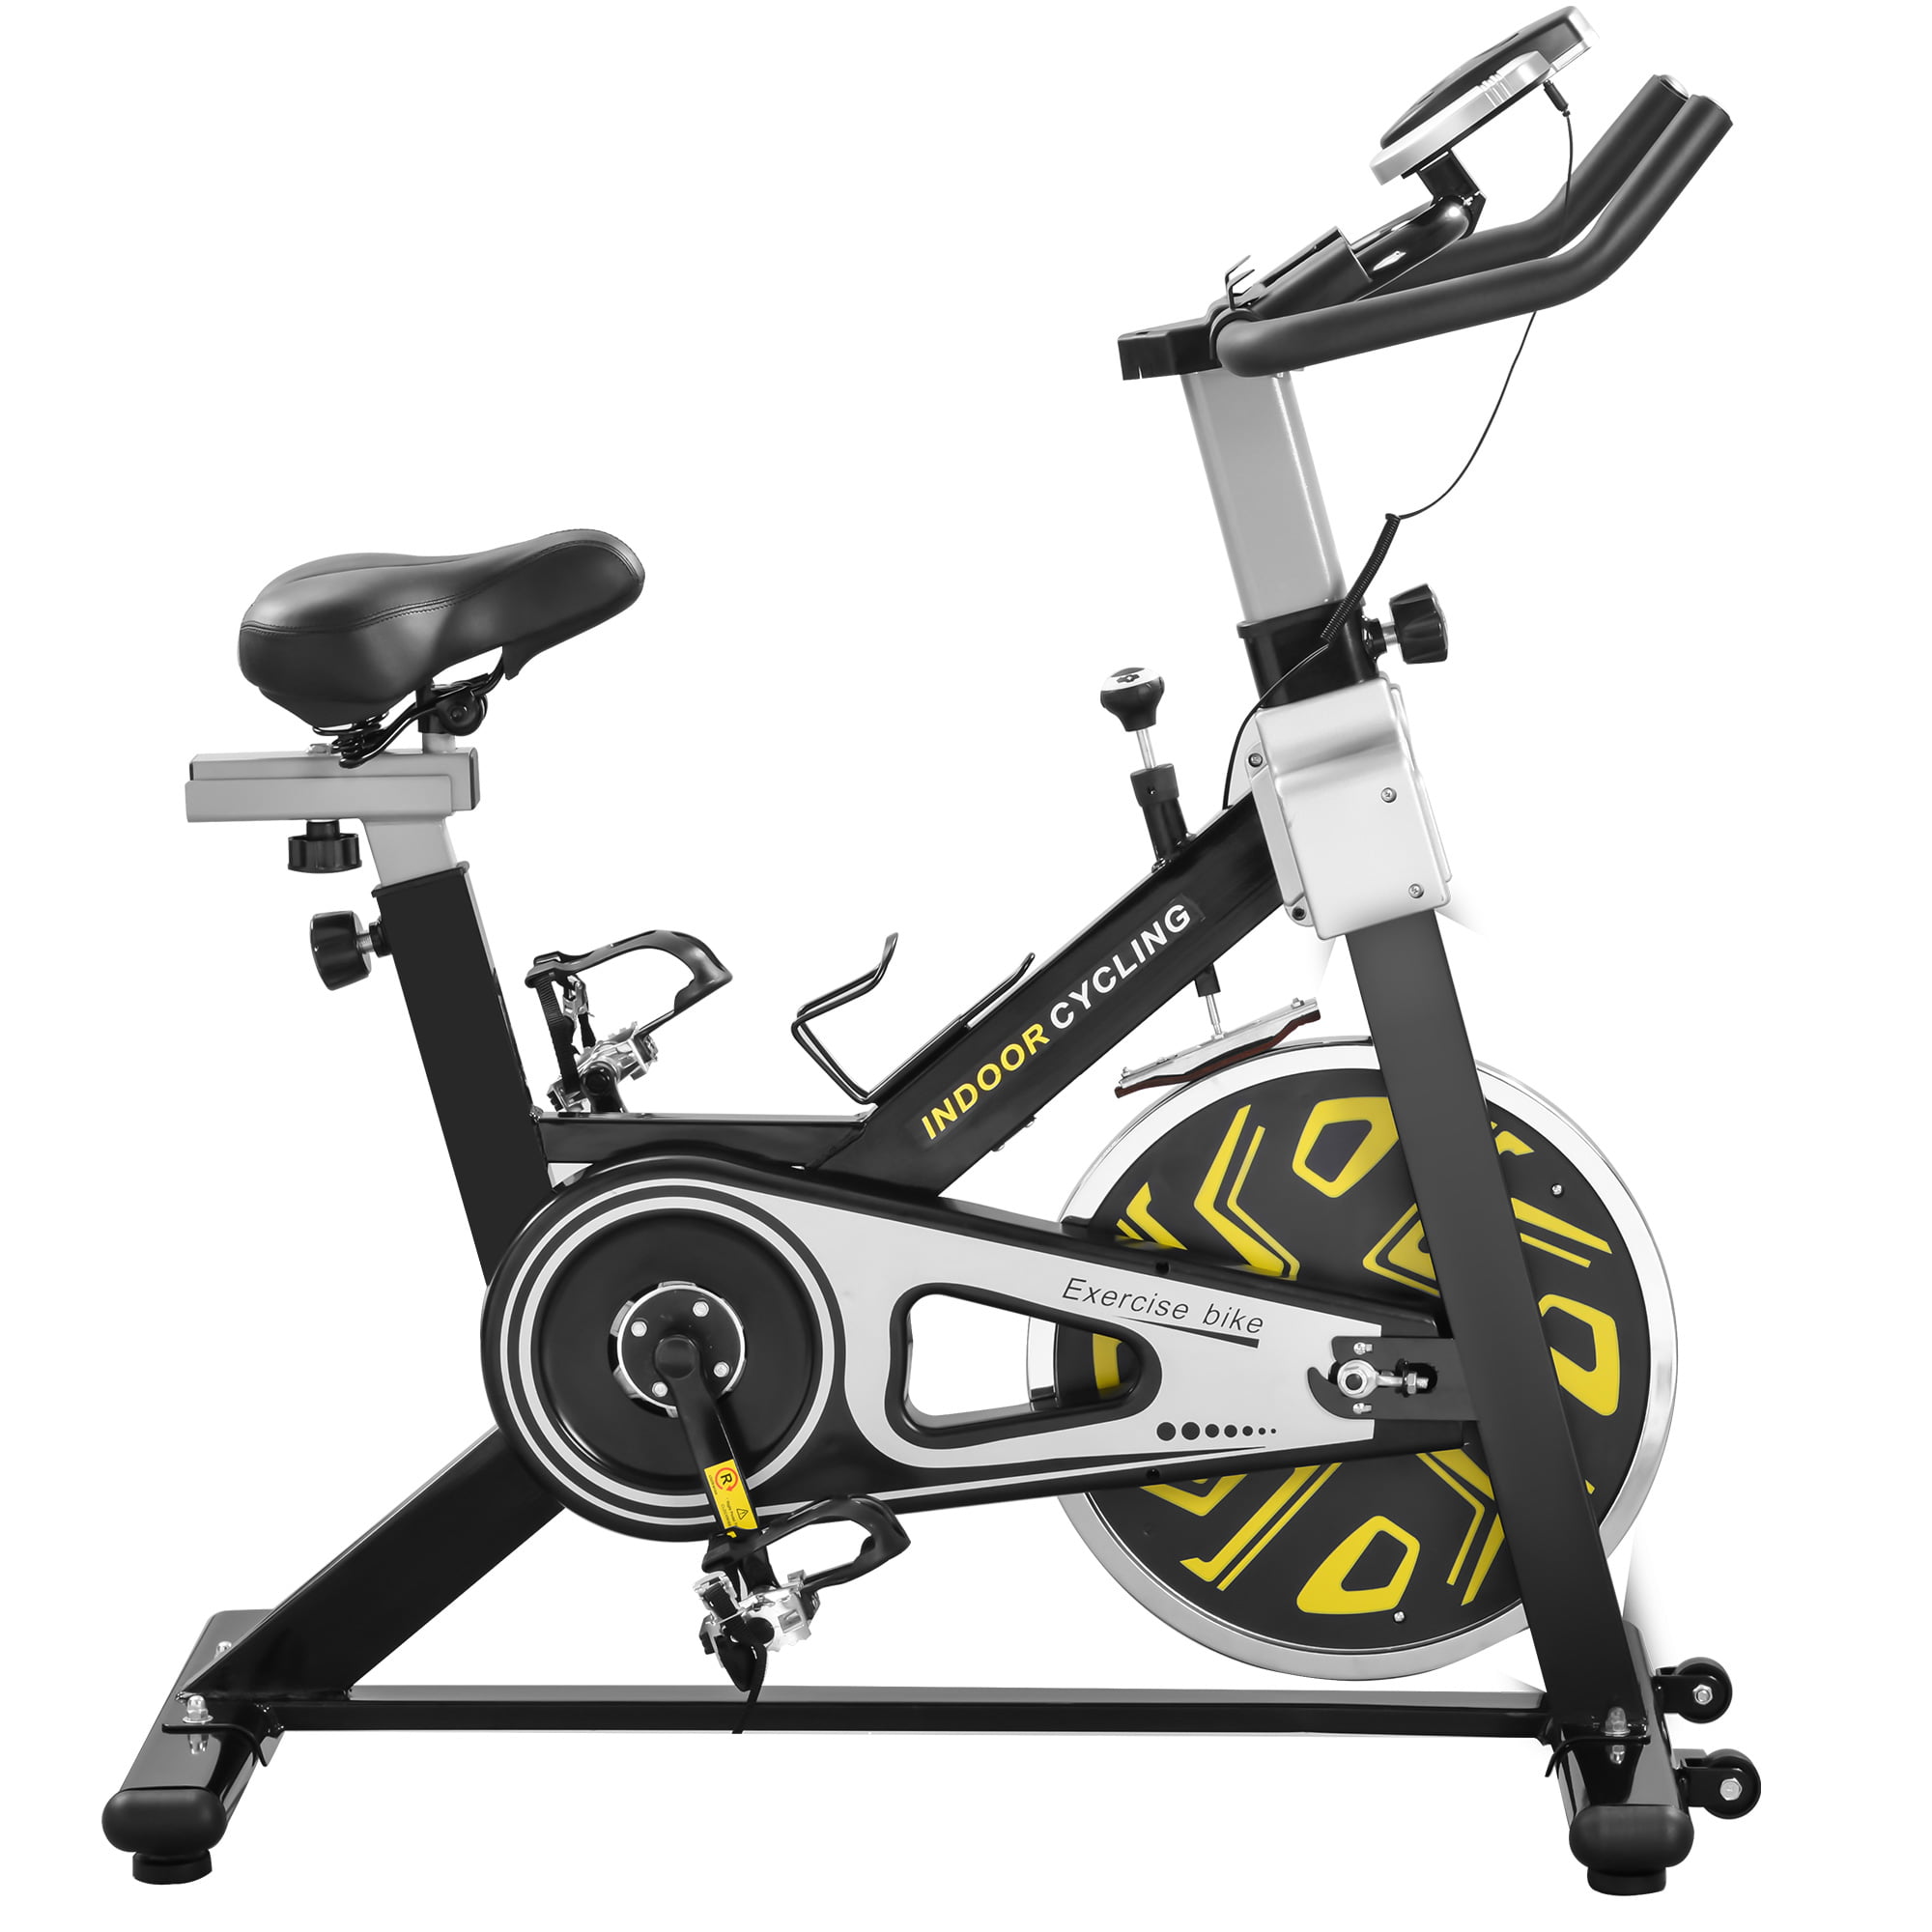 Details about   Pro Indoor Bicycle Cycling Fitness Gym Cardio Workout Stationary Exercise Bike 